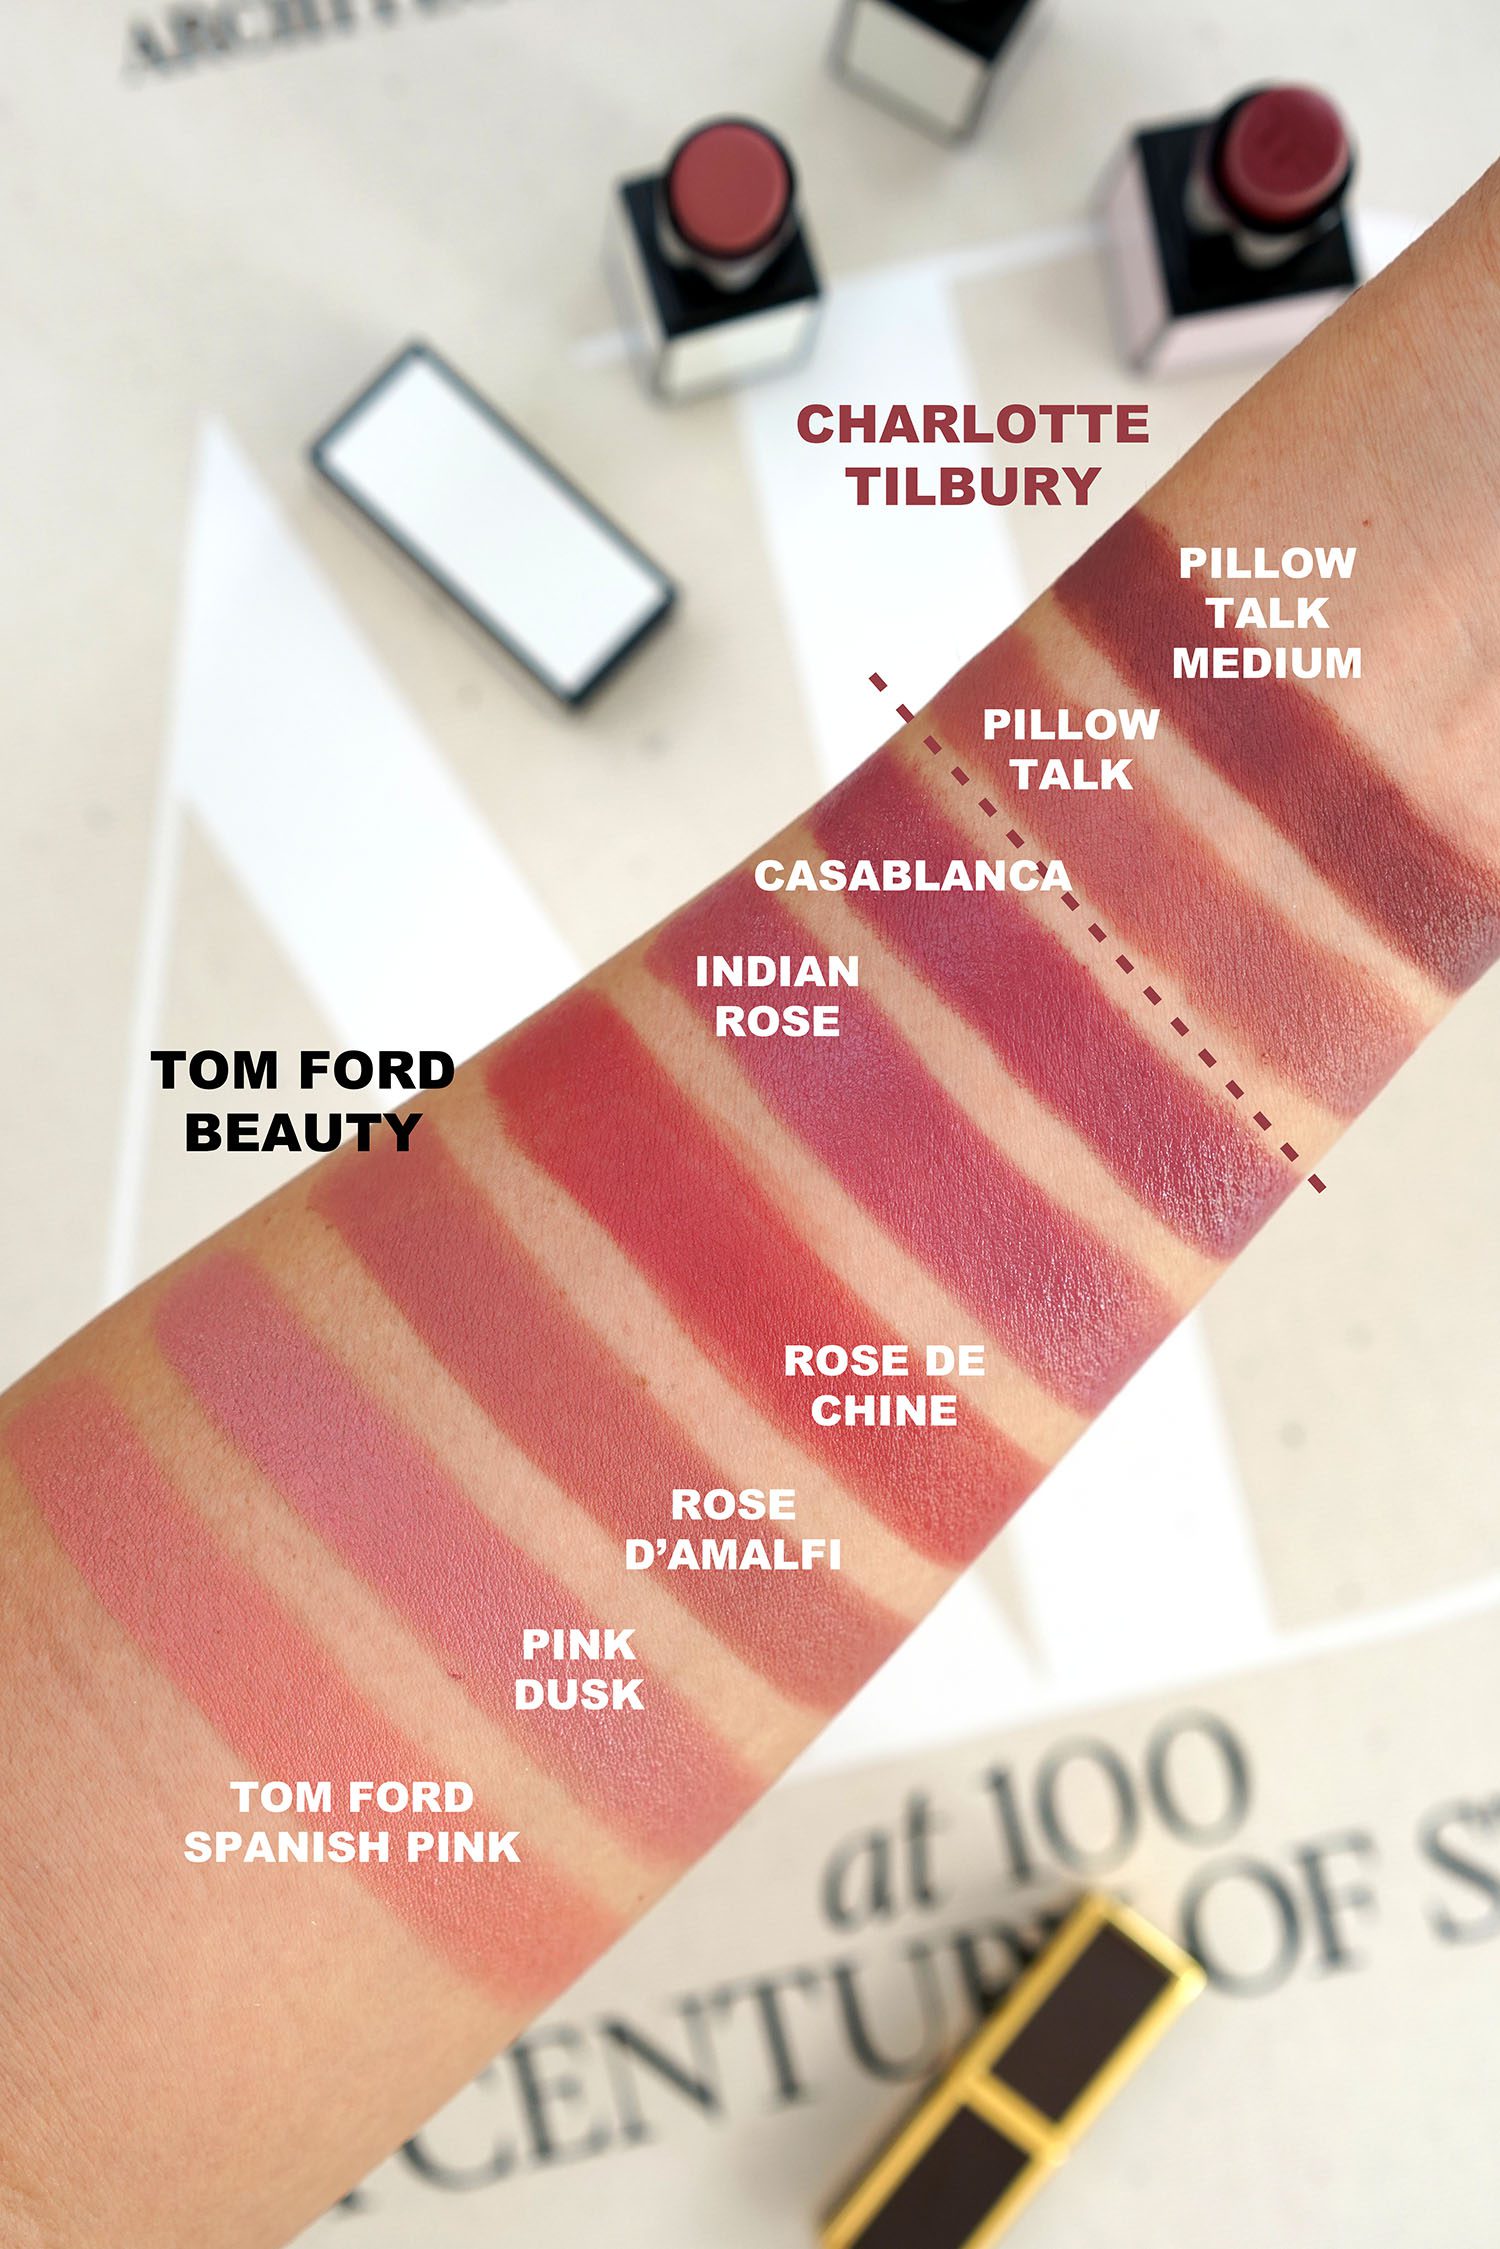 Tom Ford Private Garden Ultra Satin Lip Colors Reviews & Swatches